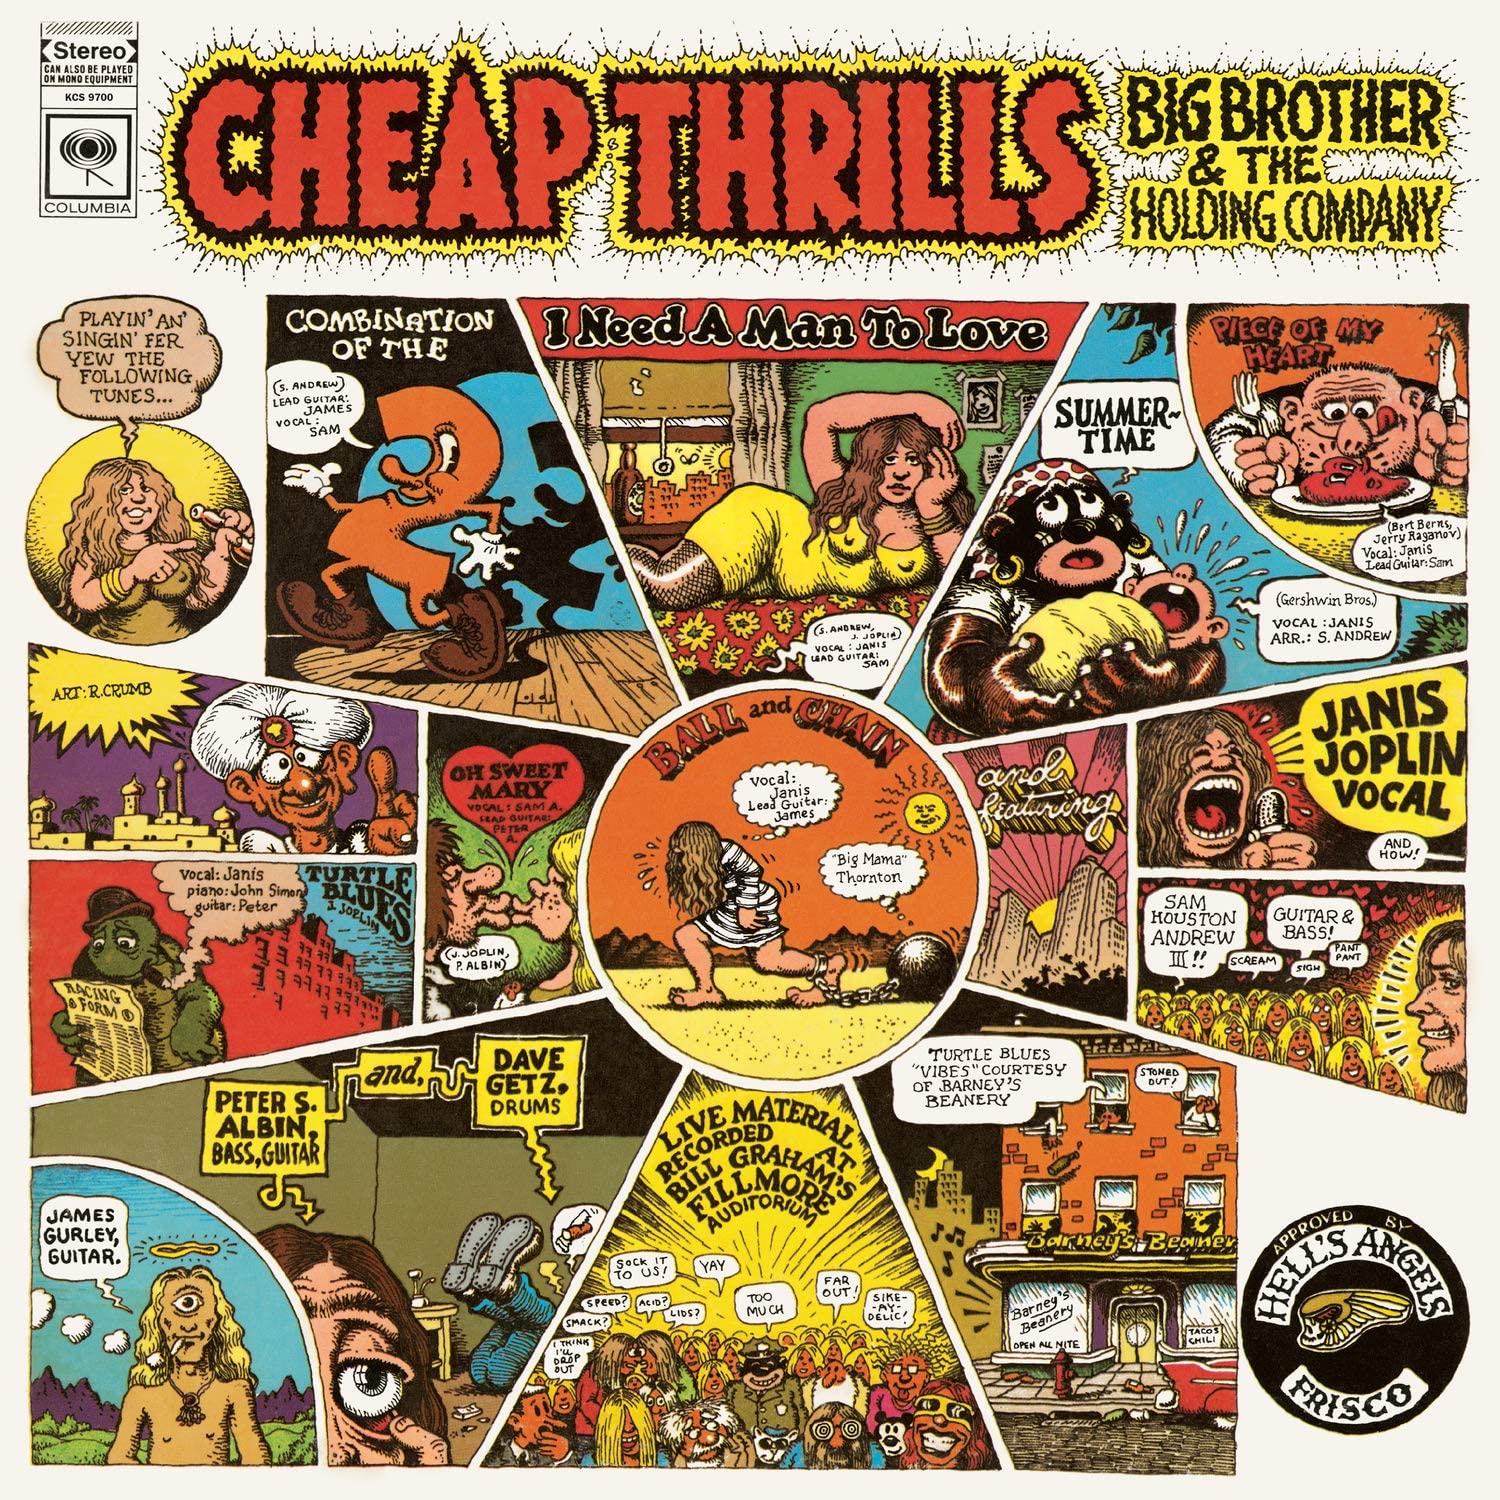 Big Brother & The Holding Company – Cheap Thrills cover album